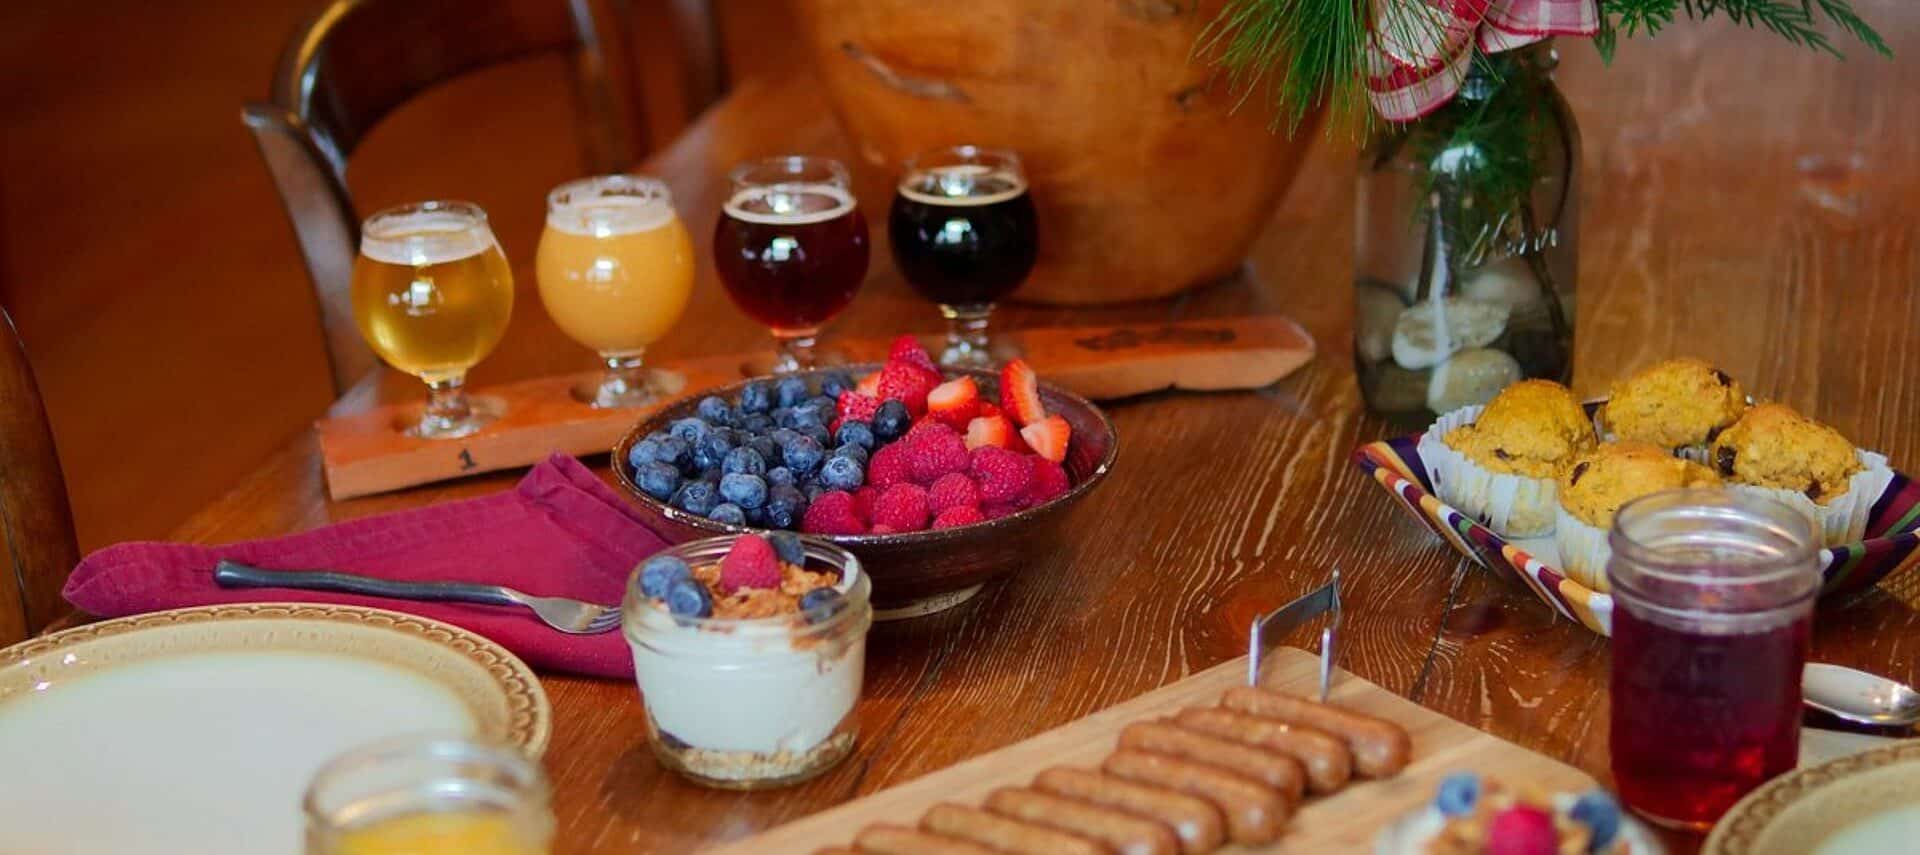 Dark wood dining table with flight of juice glasses, bowl of berries, muffins and platter of sausage links